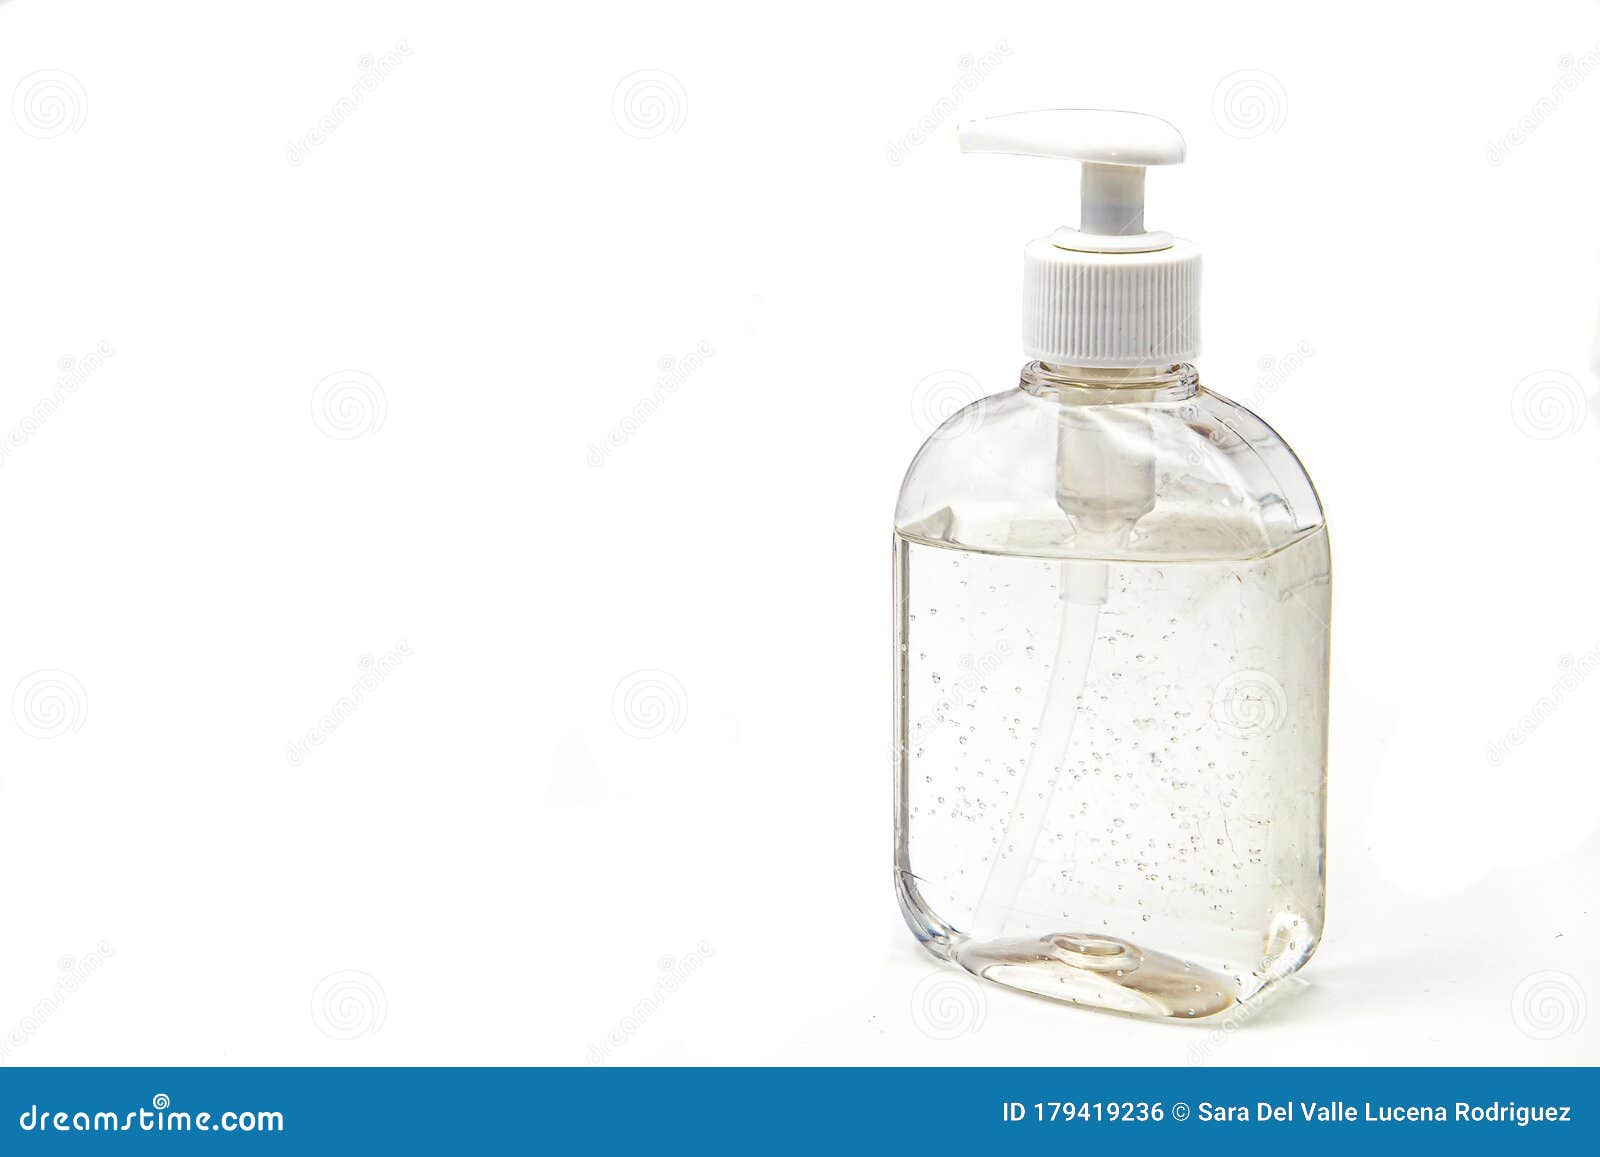 hydroalcoholic gel bottle with hands for deep medical cleaning